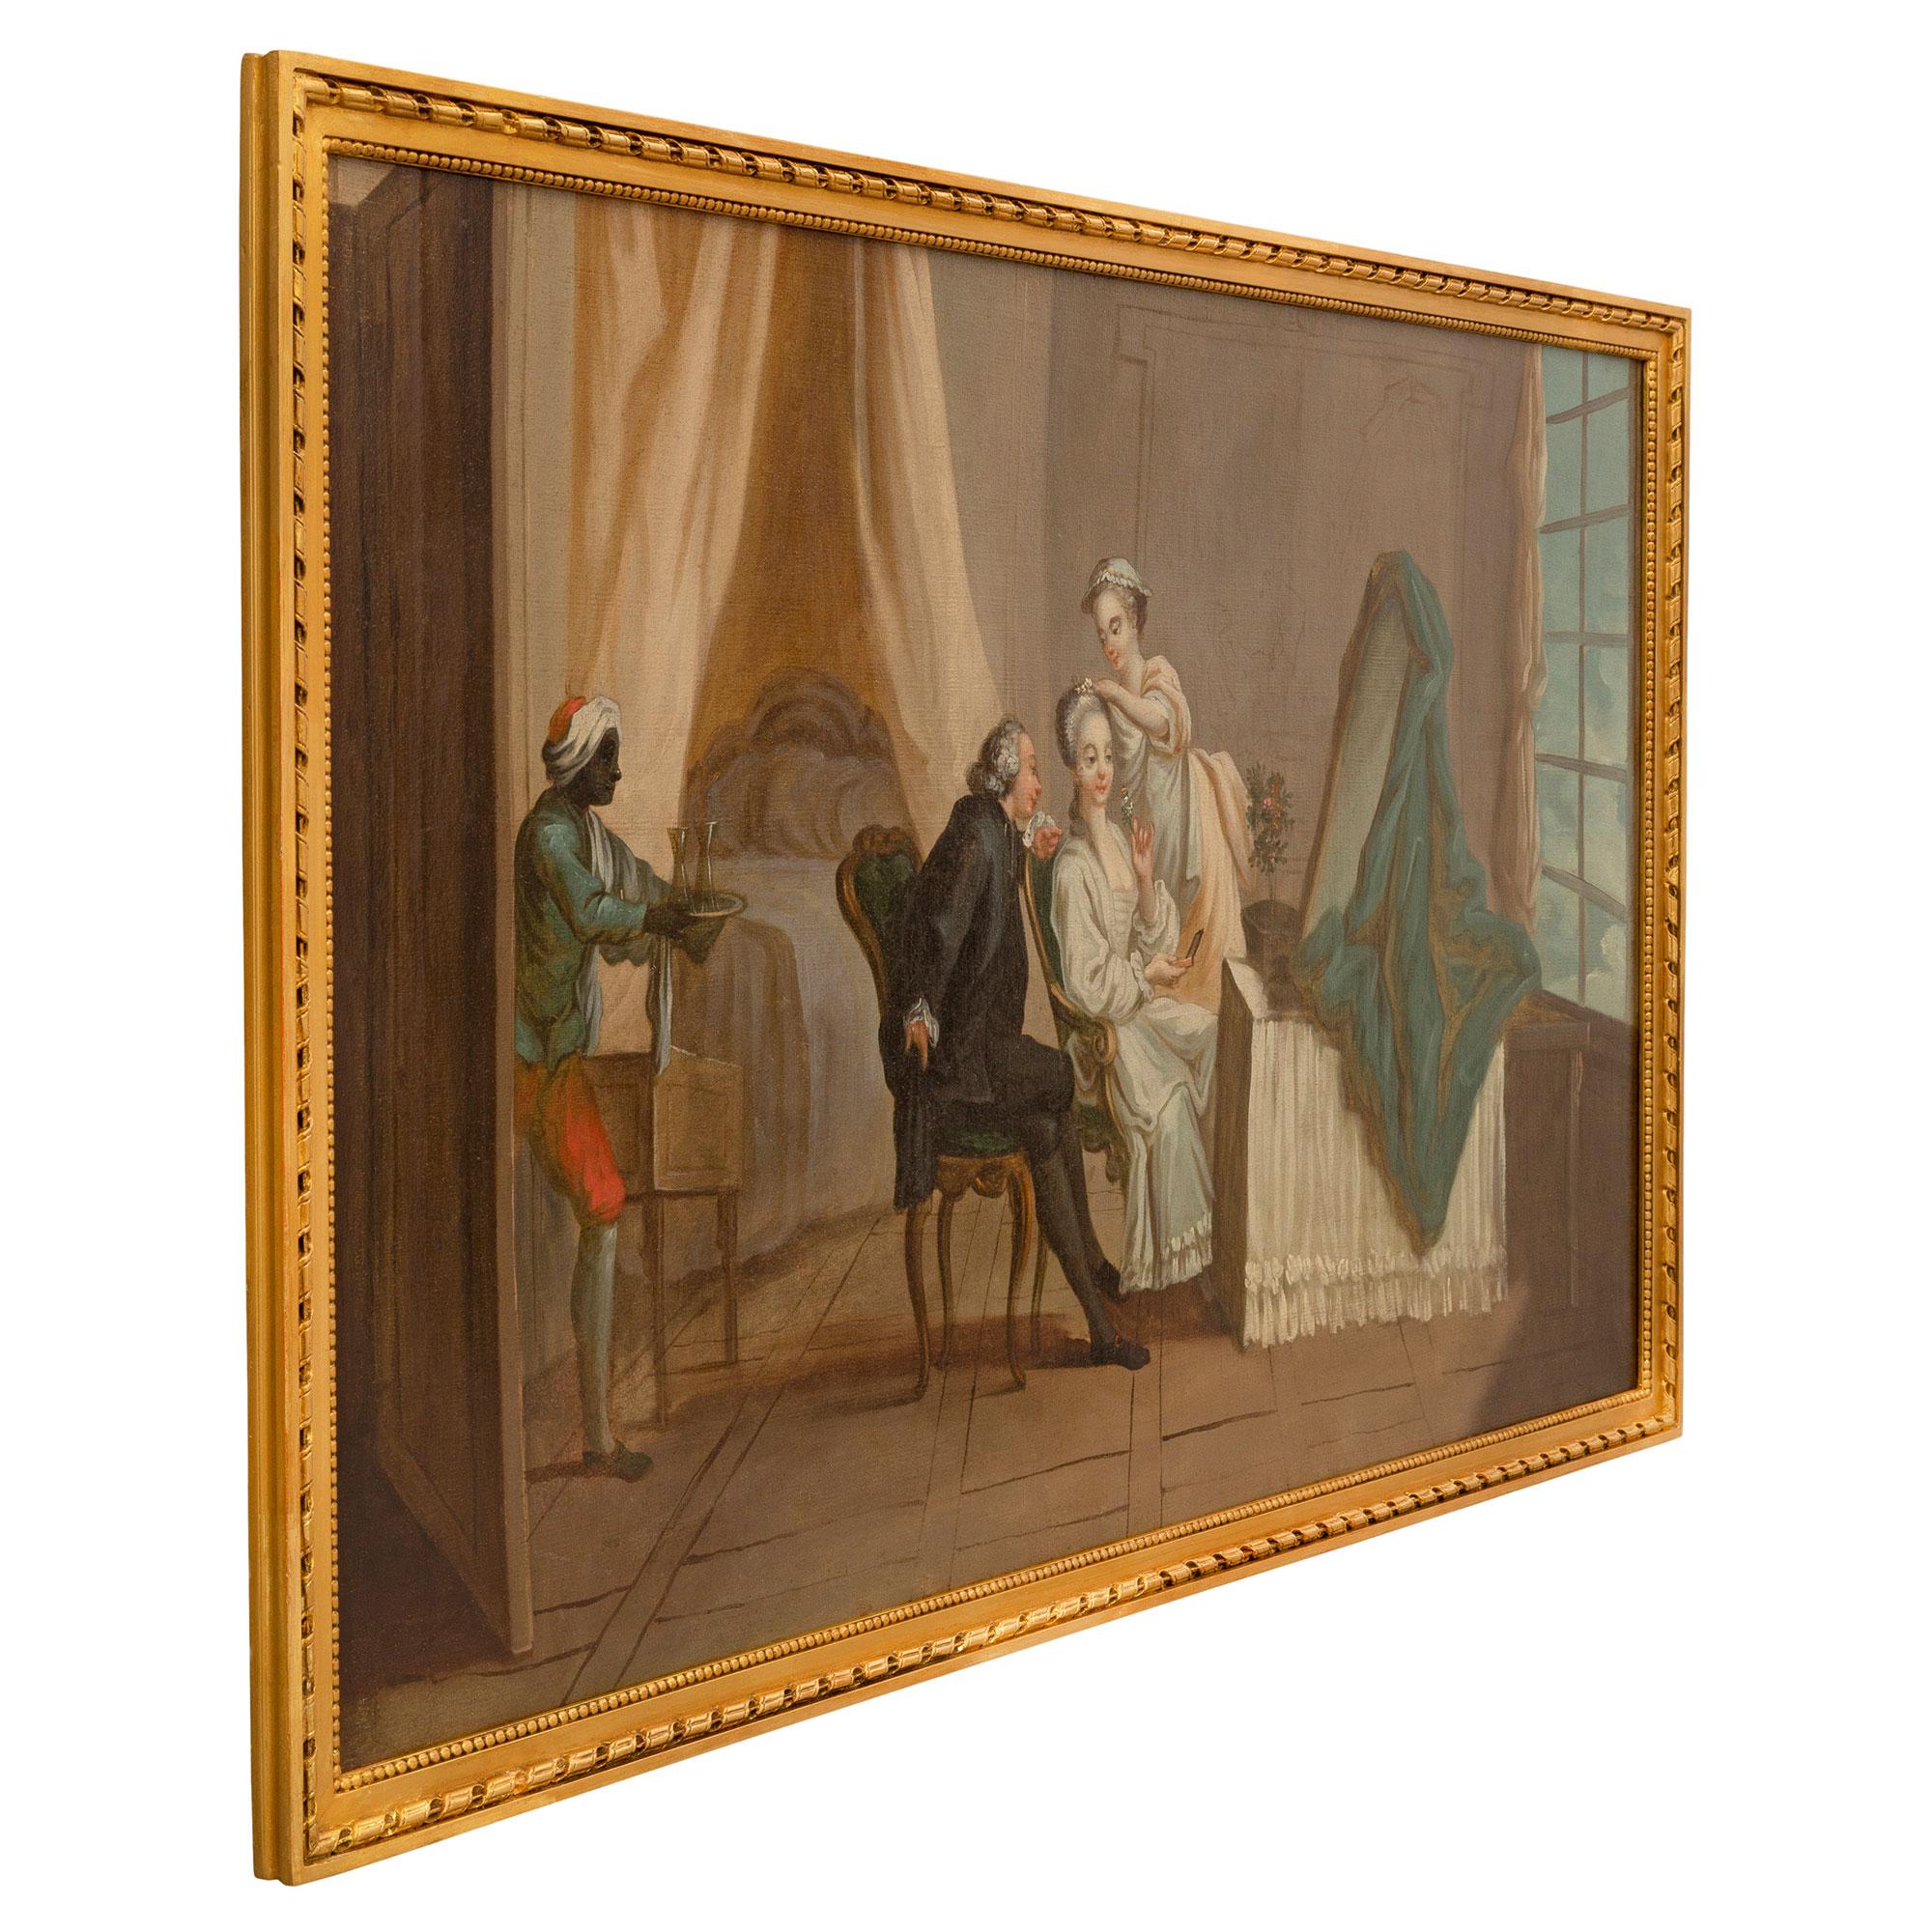 A wonderfully executed Continental 19th Century oil on canvas painting. The painting is set within its original giltwood frame with a most elegant mottled, beaded and twisted rope design. The painting depicts an elegant maiden in a long flowing